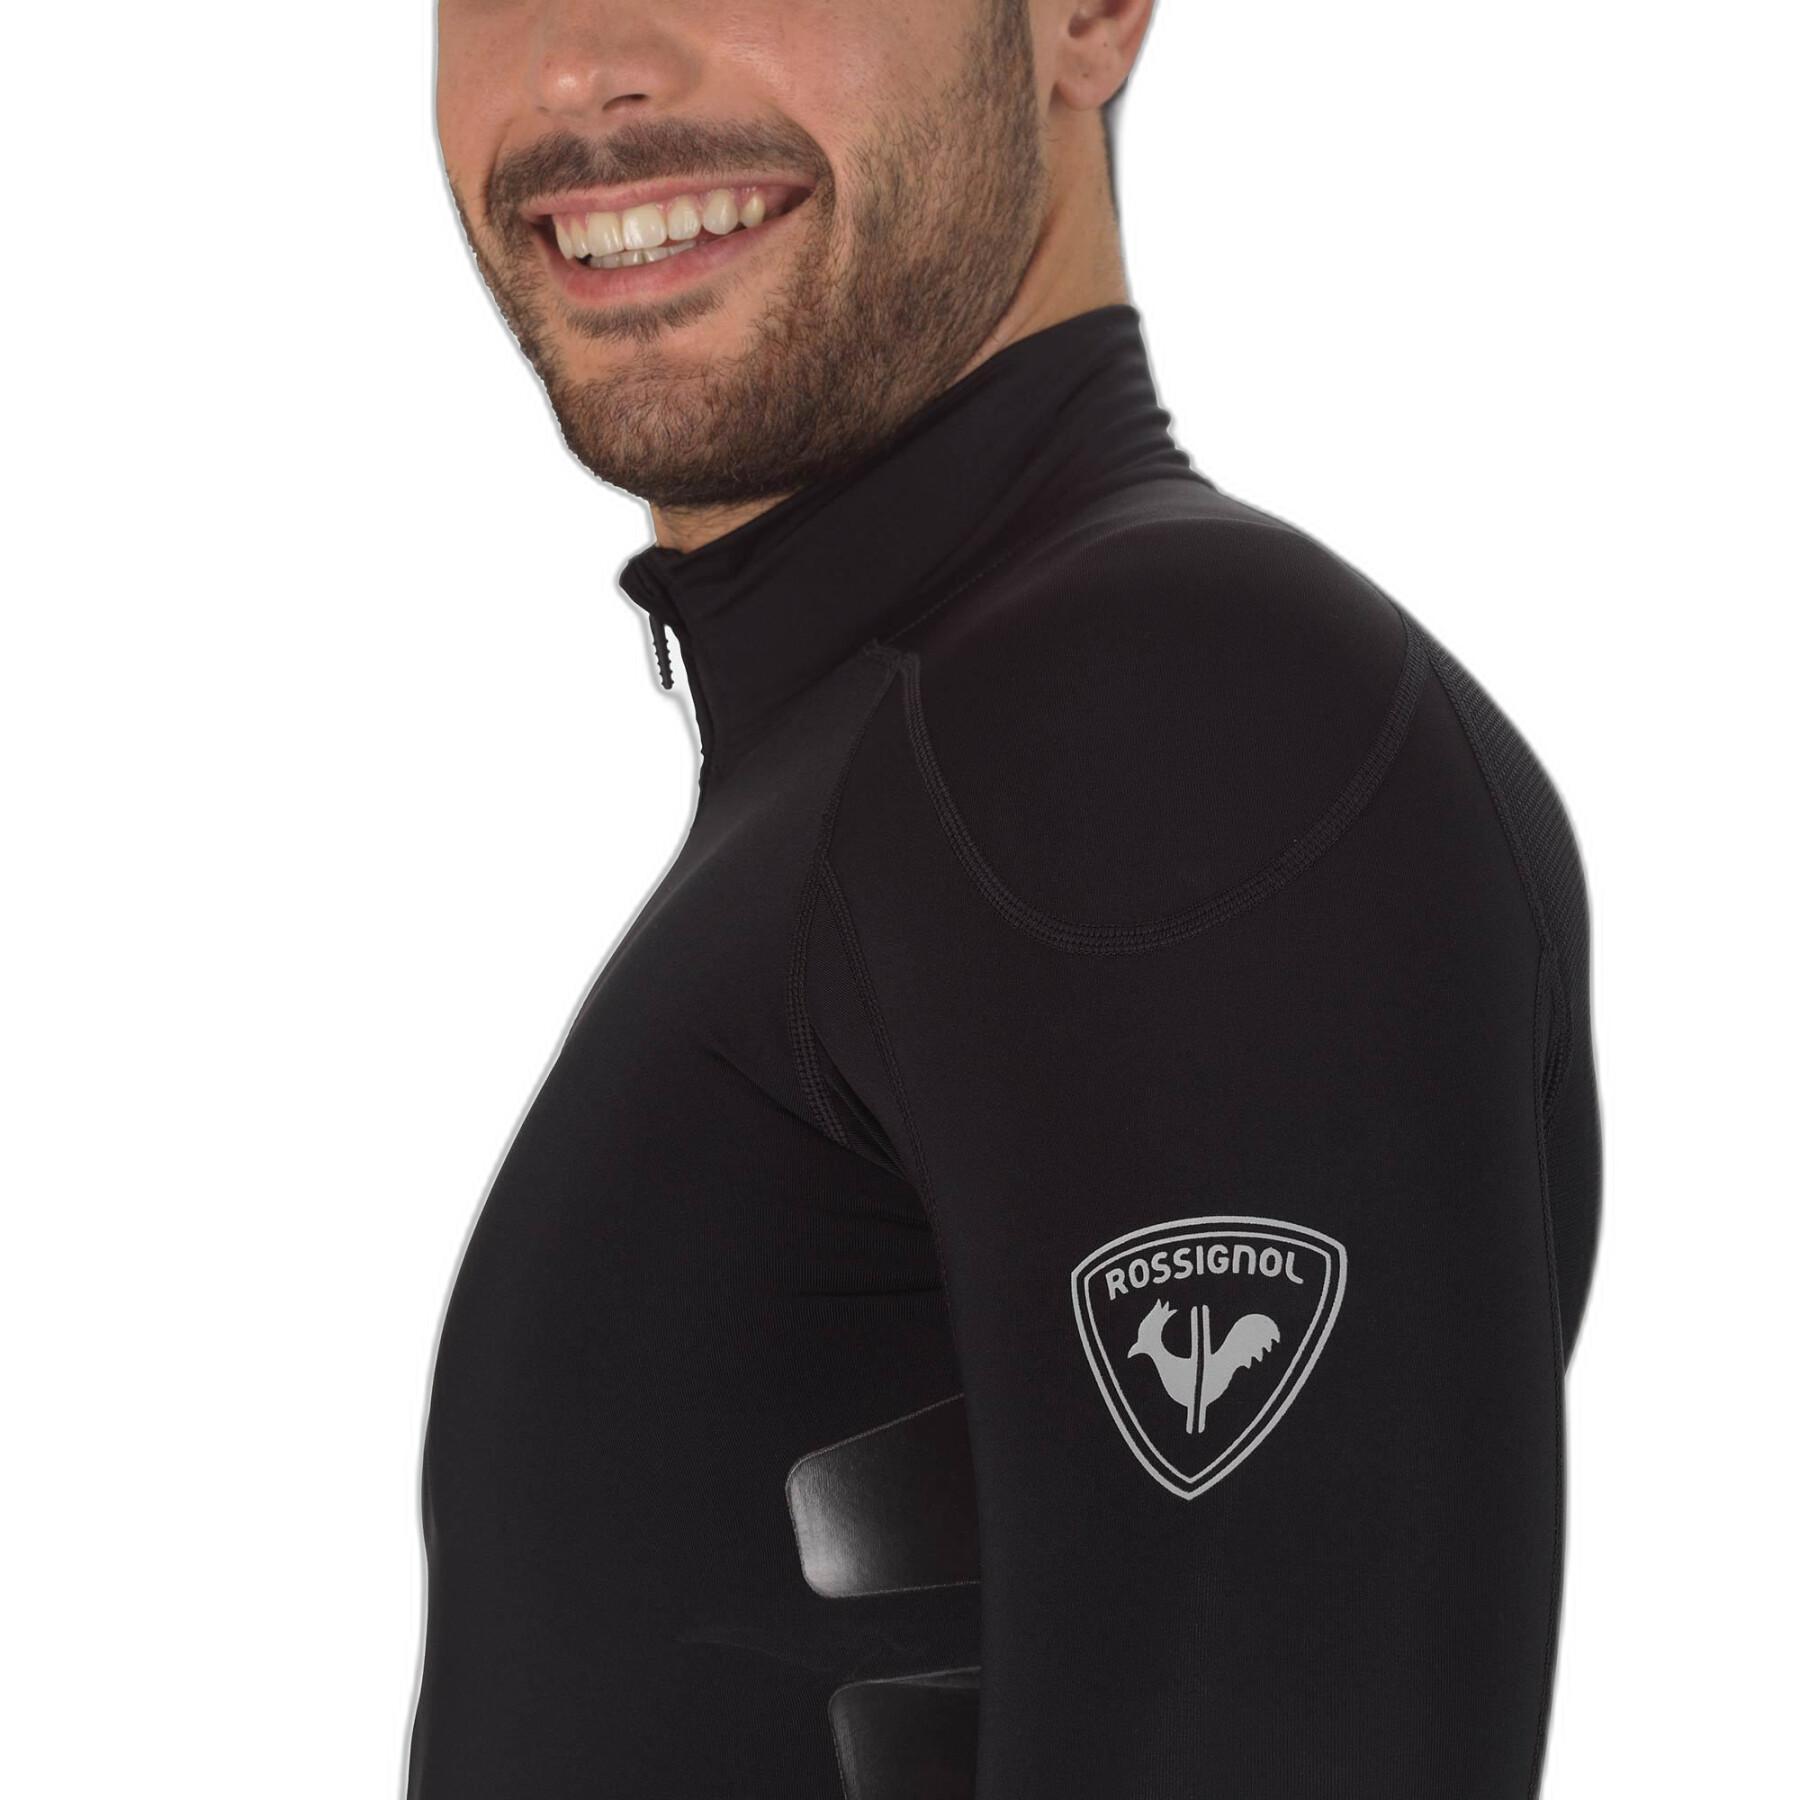 Compression jersey Rossignol Infini Race